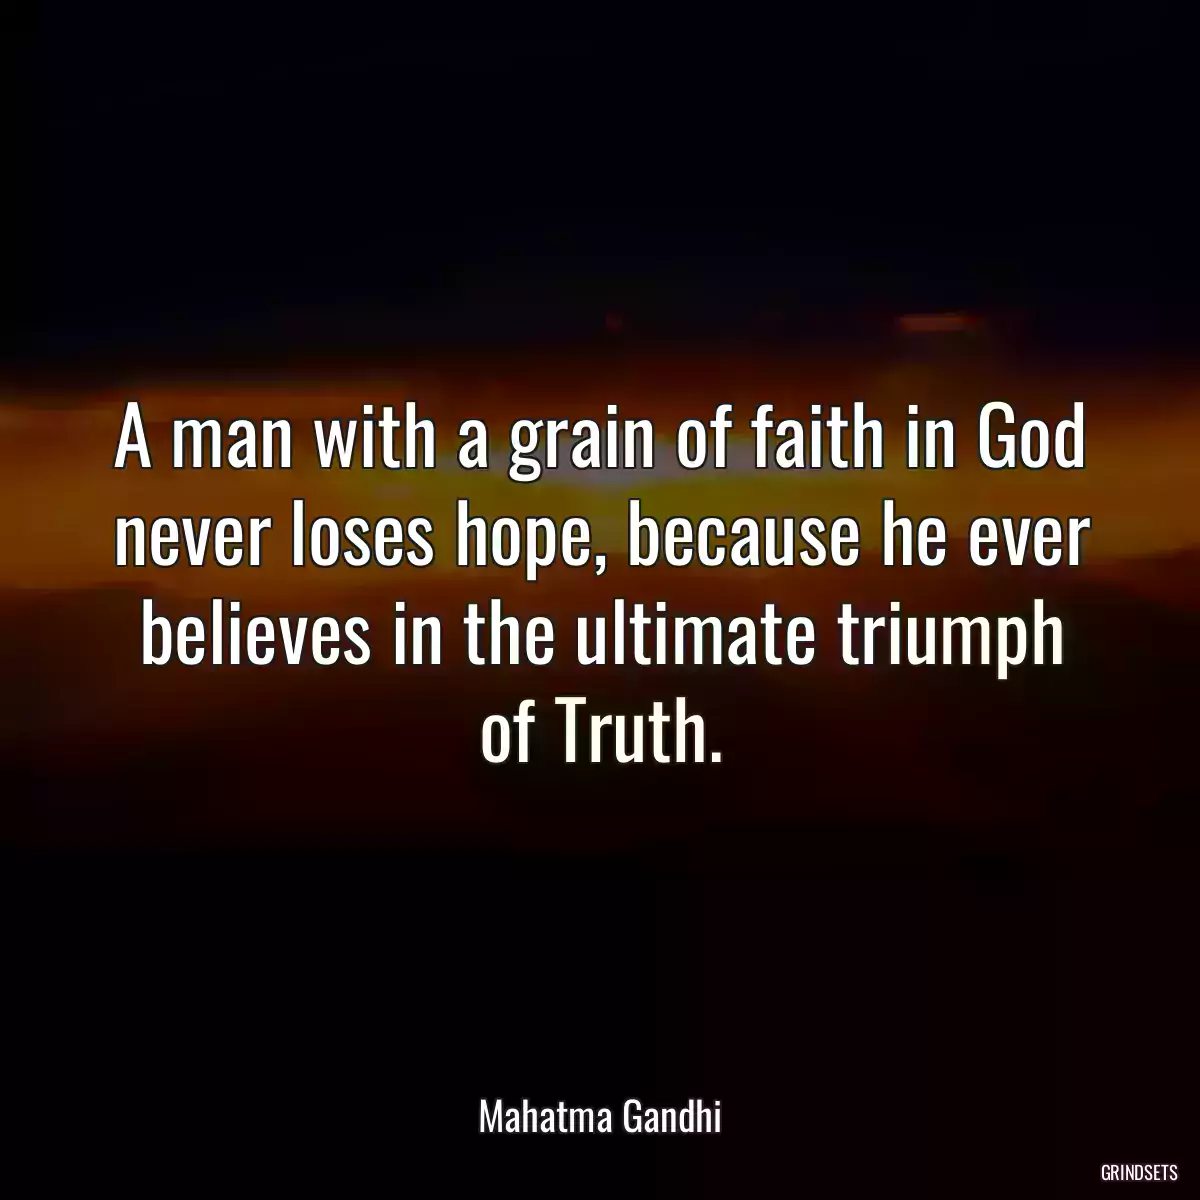 A man with a grain of faith in God never loses hope, because he ever believes in the ultimate triumph of Truth.